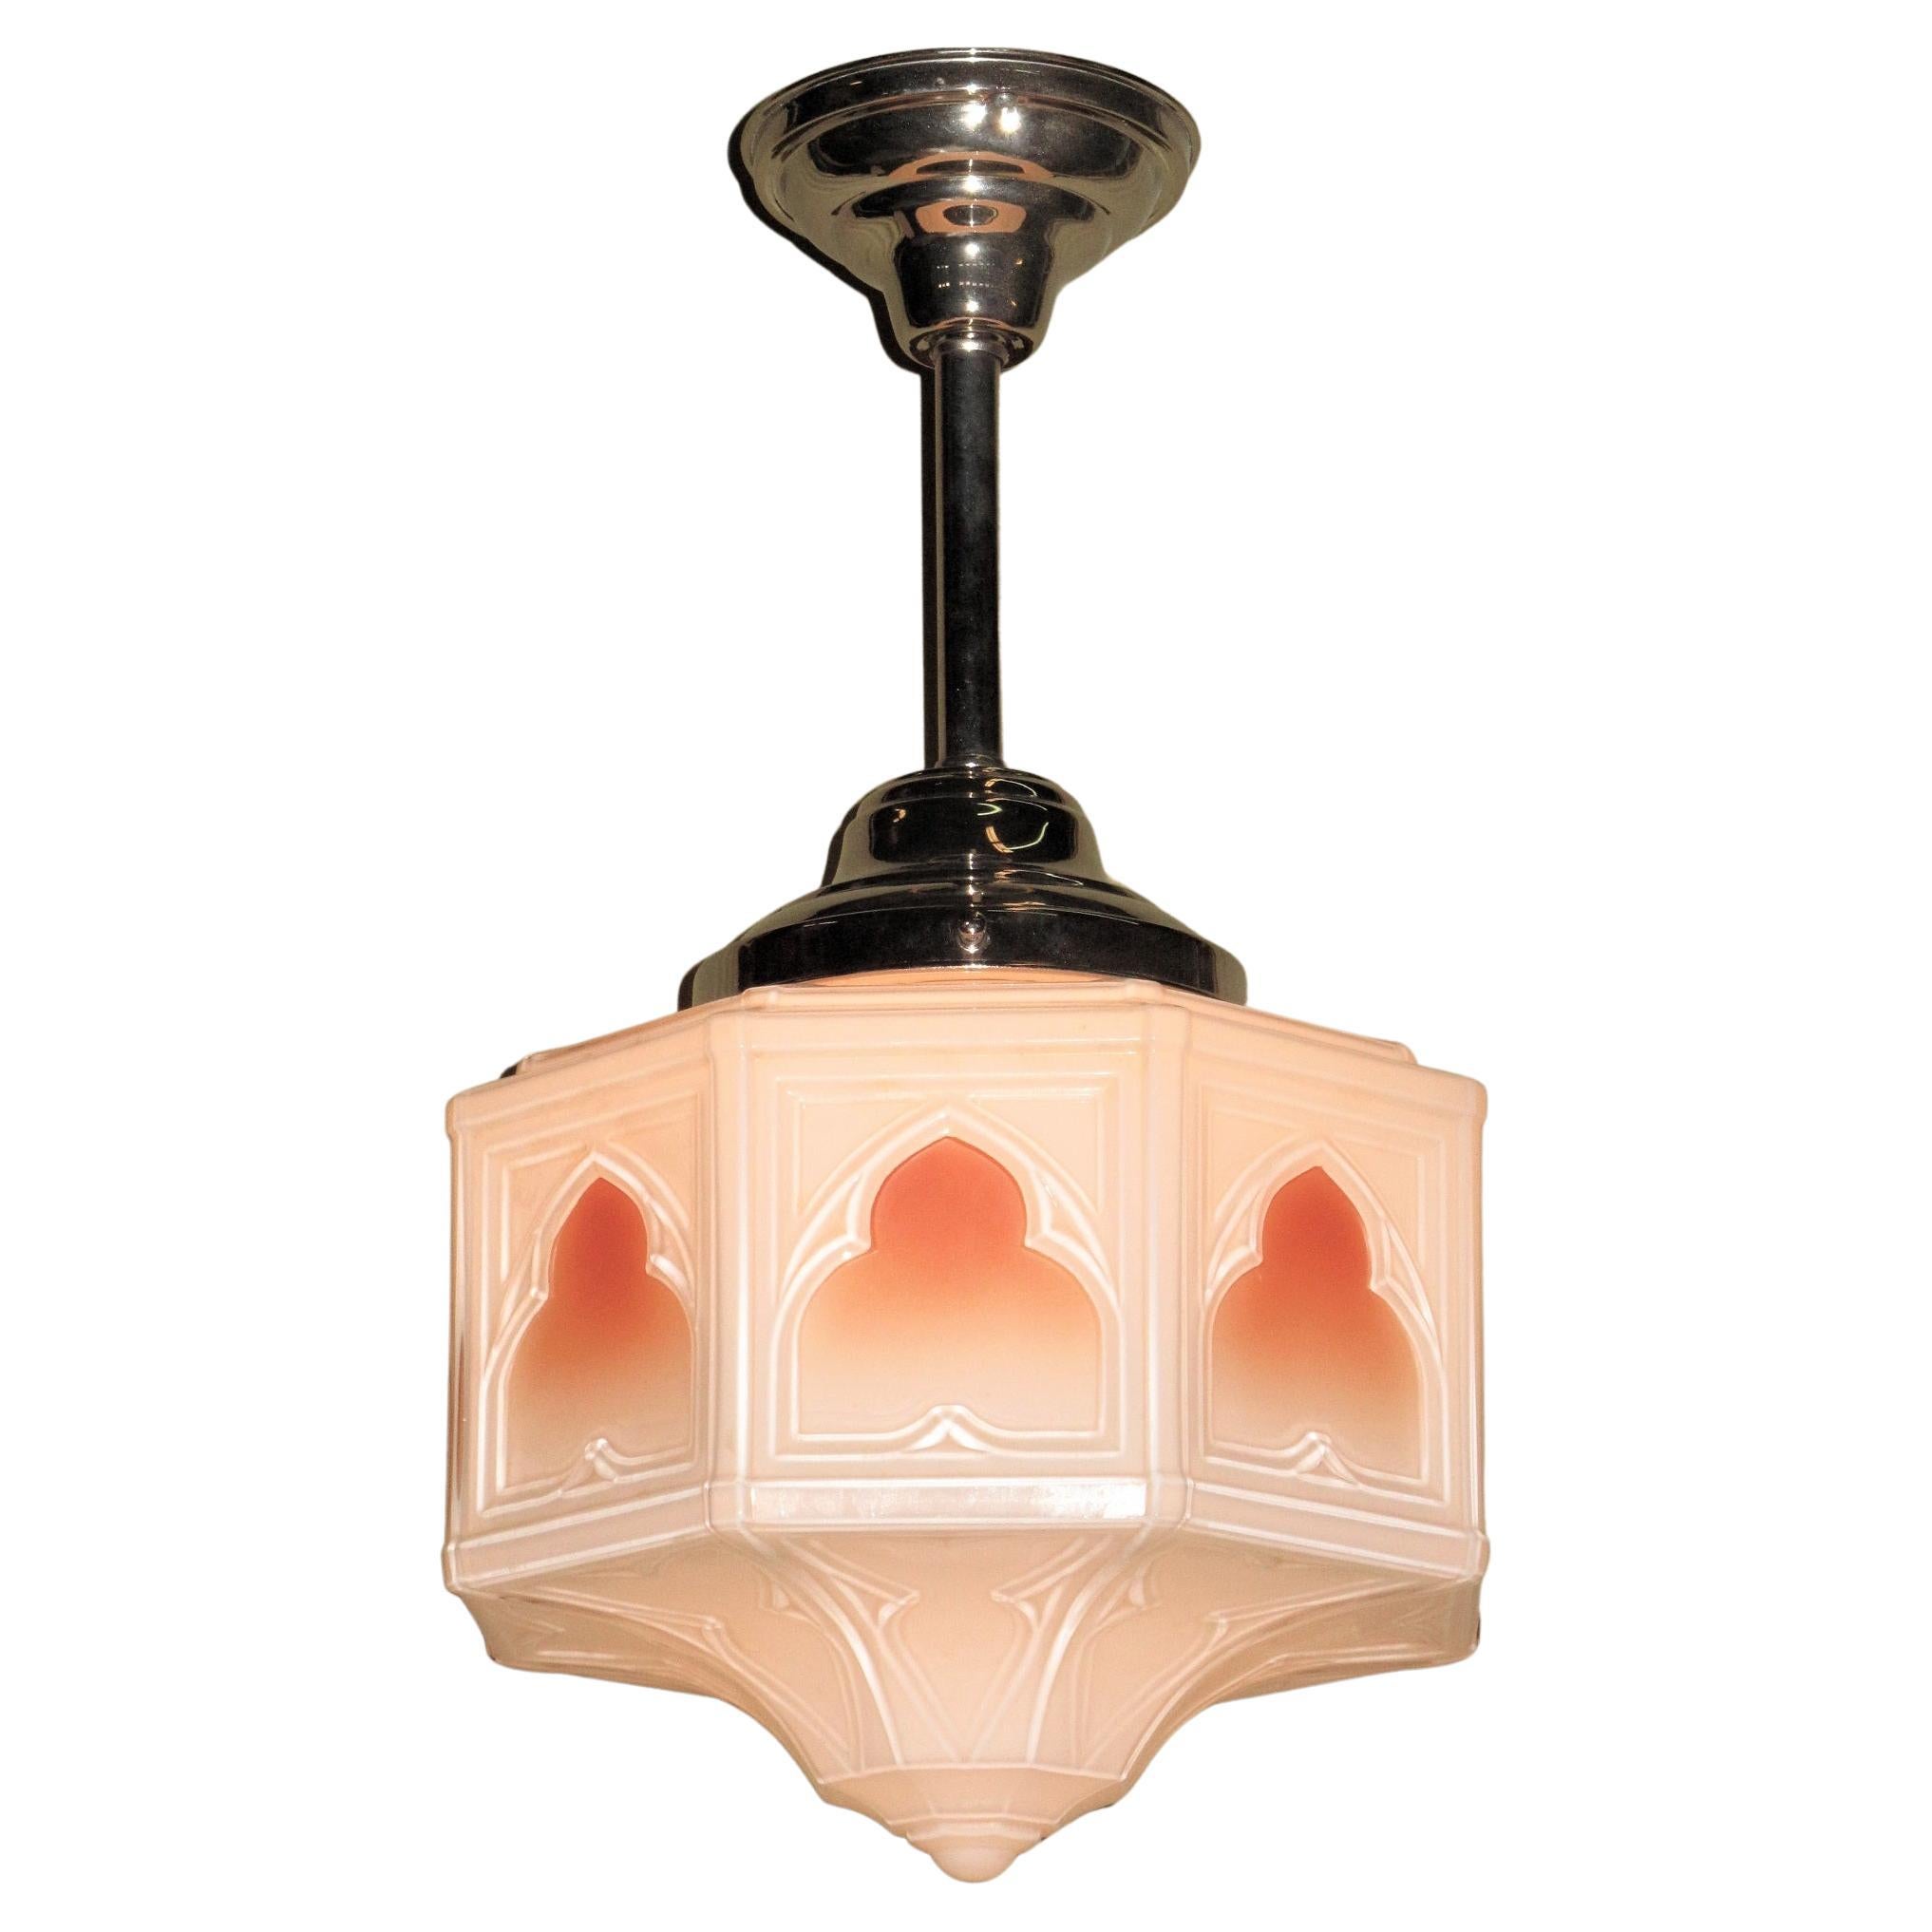 Colorful Vintage Fixture Moorish Arches and Trinity Star, Mid 1920s